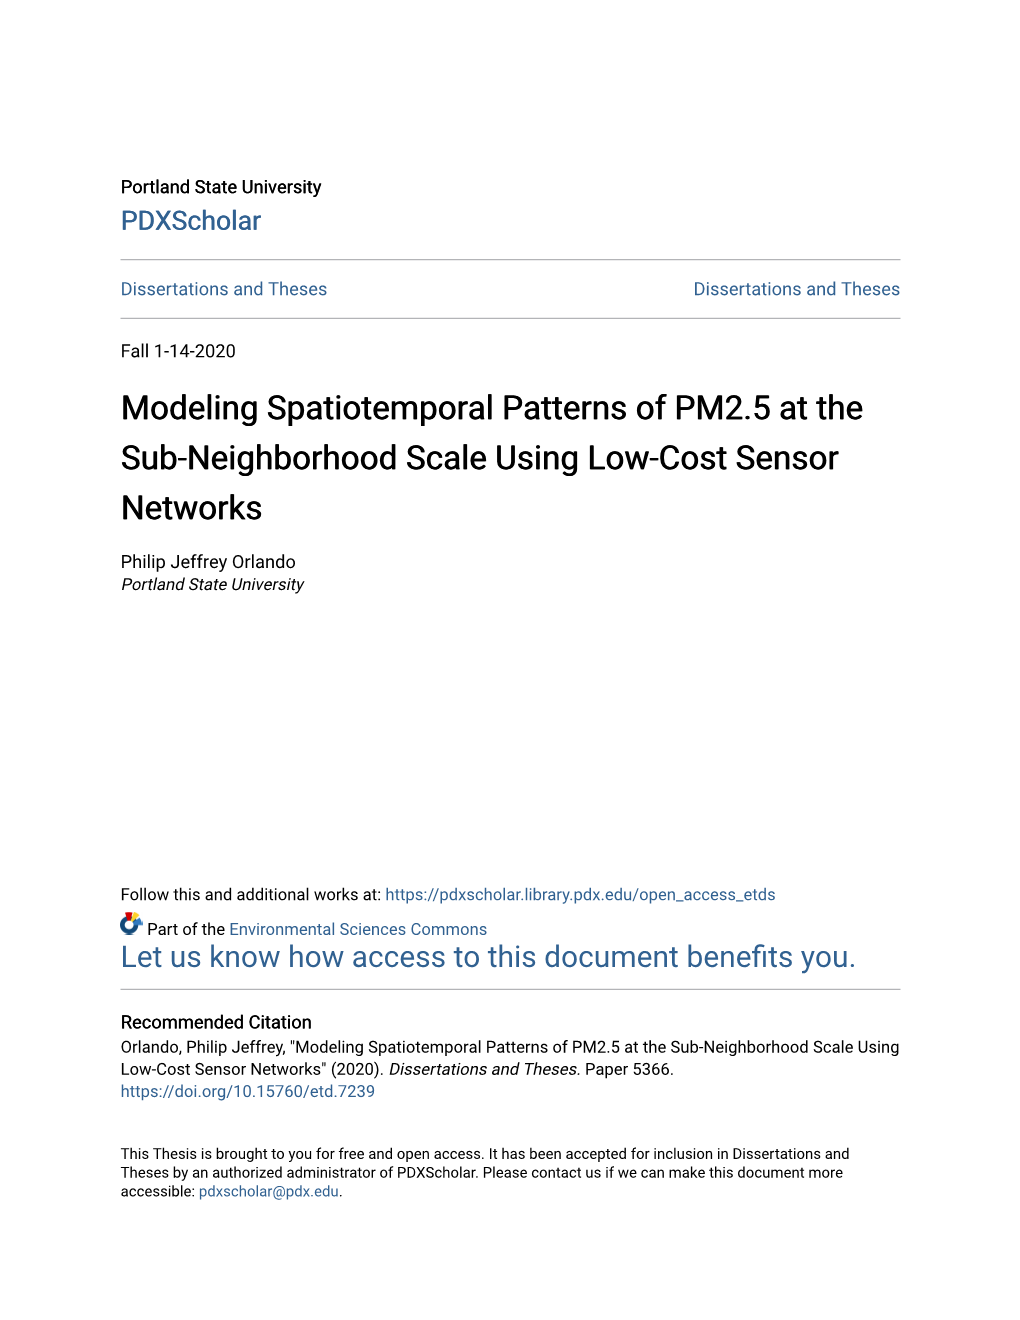 Modeling Spatiotemporal Patterns of PM2.5 at the Sub-Neighborhood Scale Using Low-Cost Sensor Networks